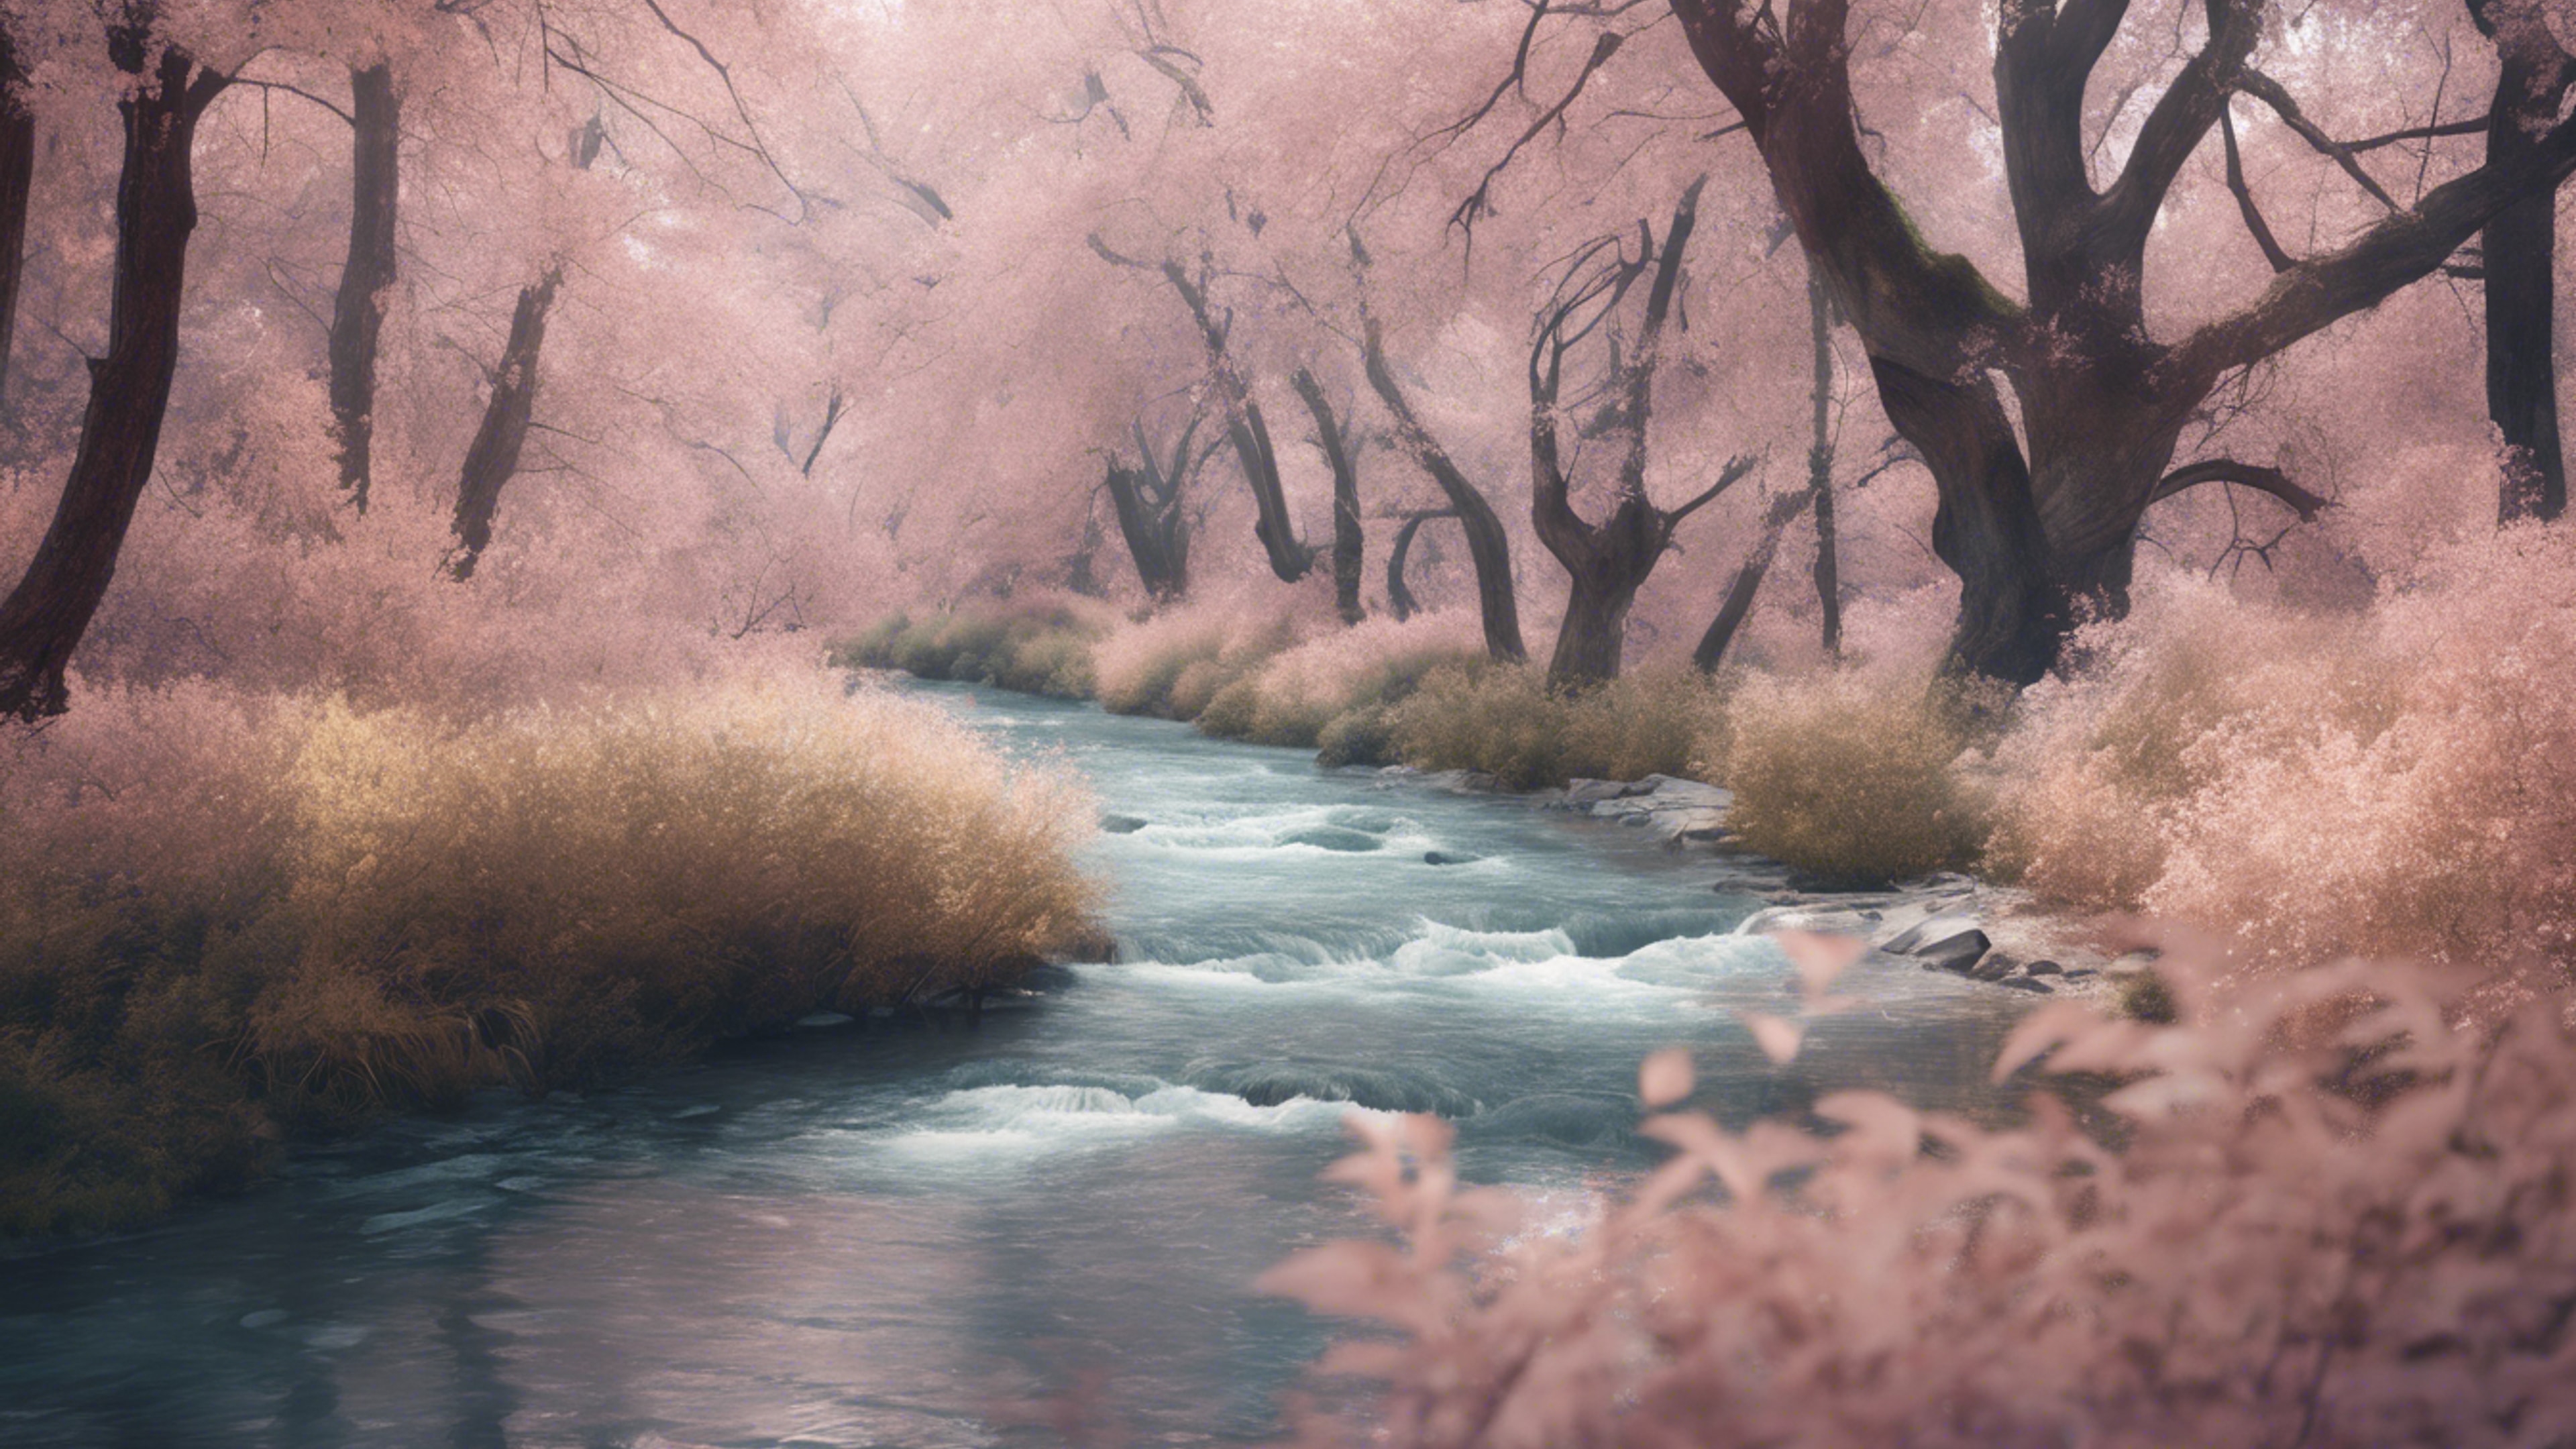 An illustration of a murmuring creek, surrounded by trees bearing cool pastel leaves. Wallpaper[1b082a297a56458ebf1b]